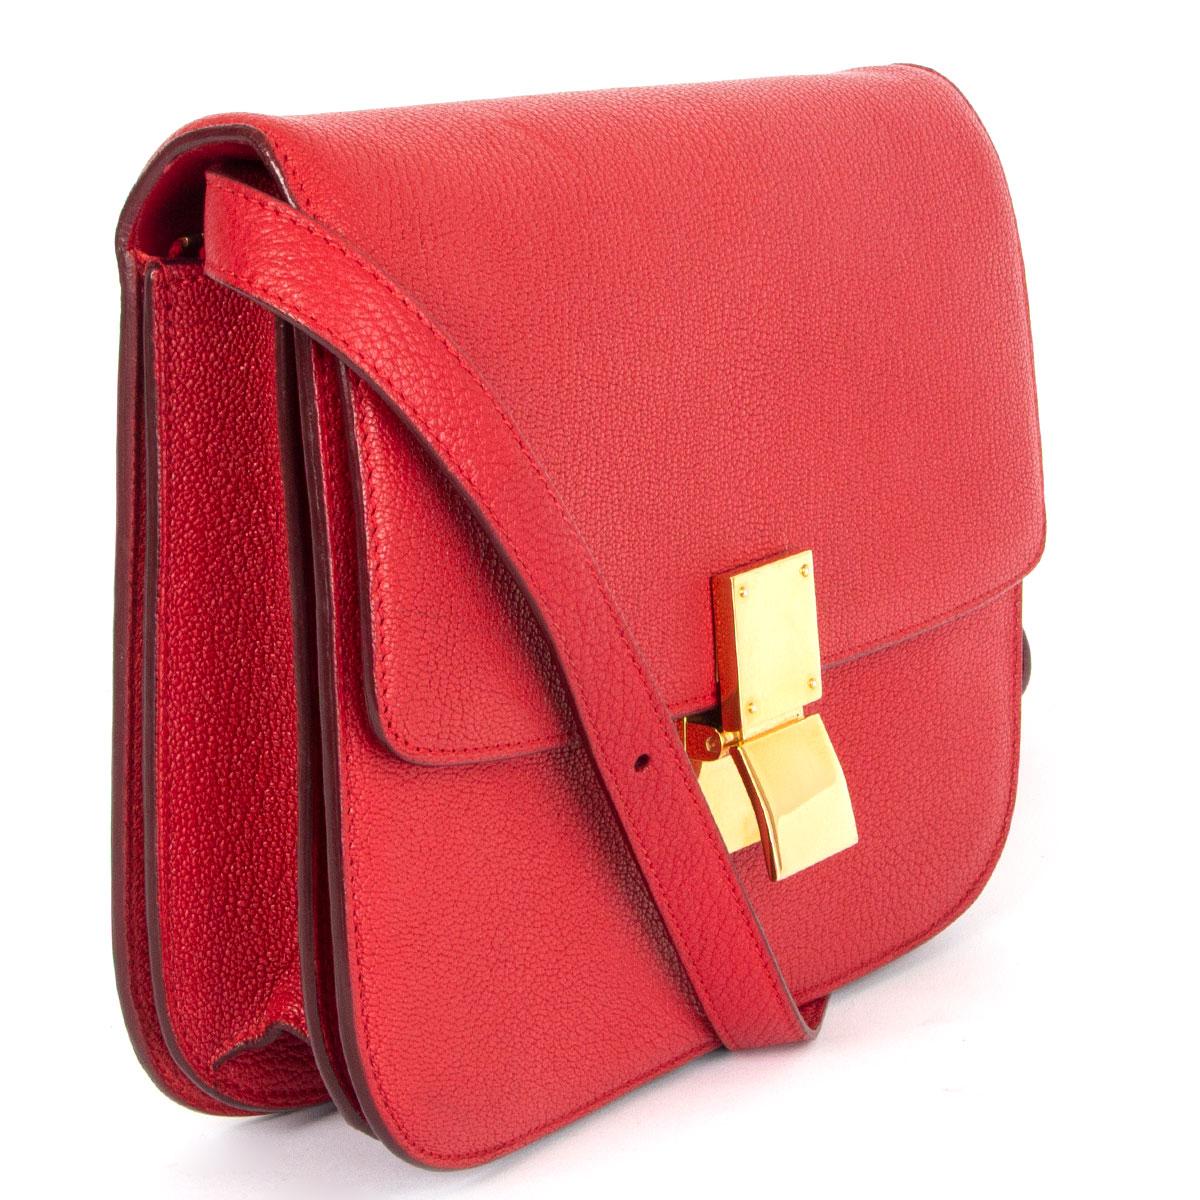 100% authentic Céline Classic Medium shoulder bag in Carmin red goatskin featuring gold-tone hardware. Opens with a push-lock on the front. The inside is divided into two compartments with two open pockets against the front and a zipper pocket